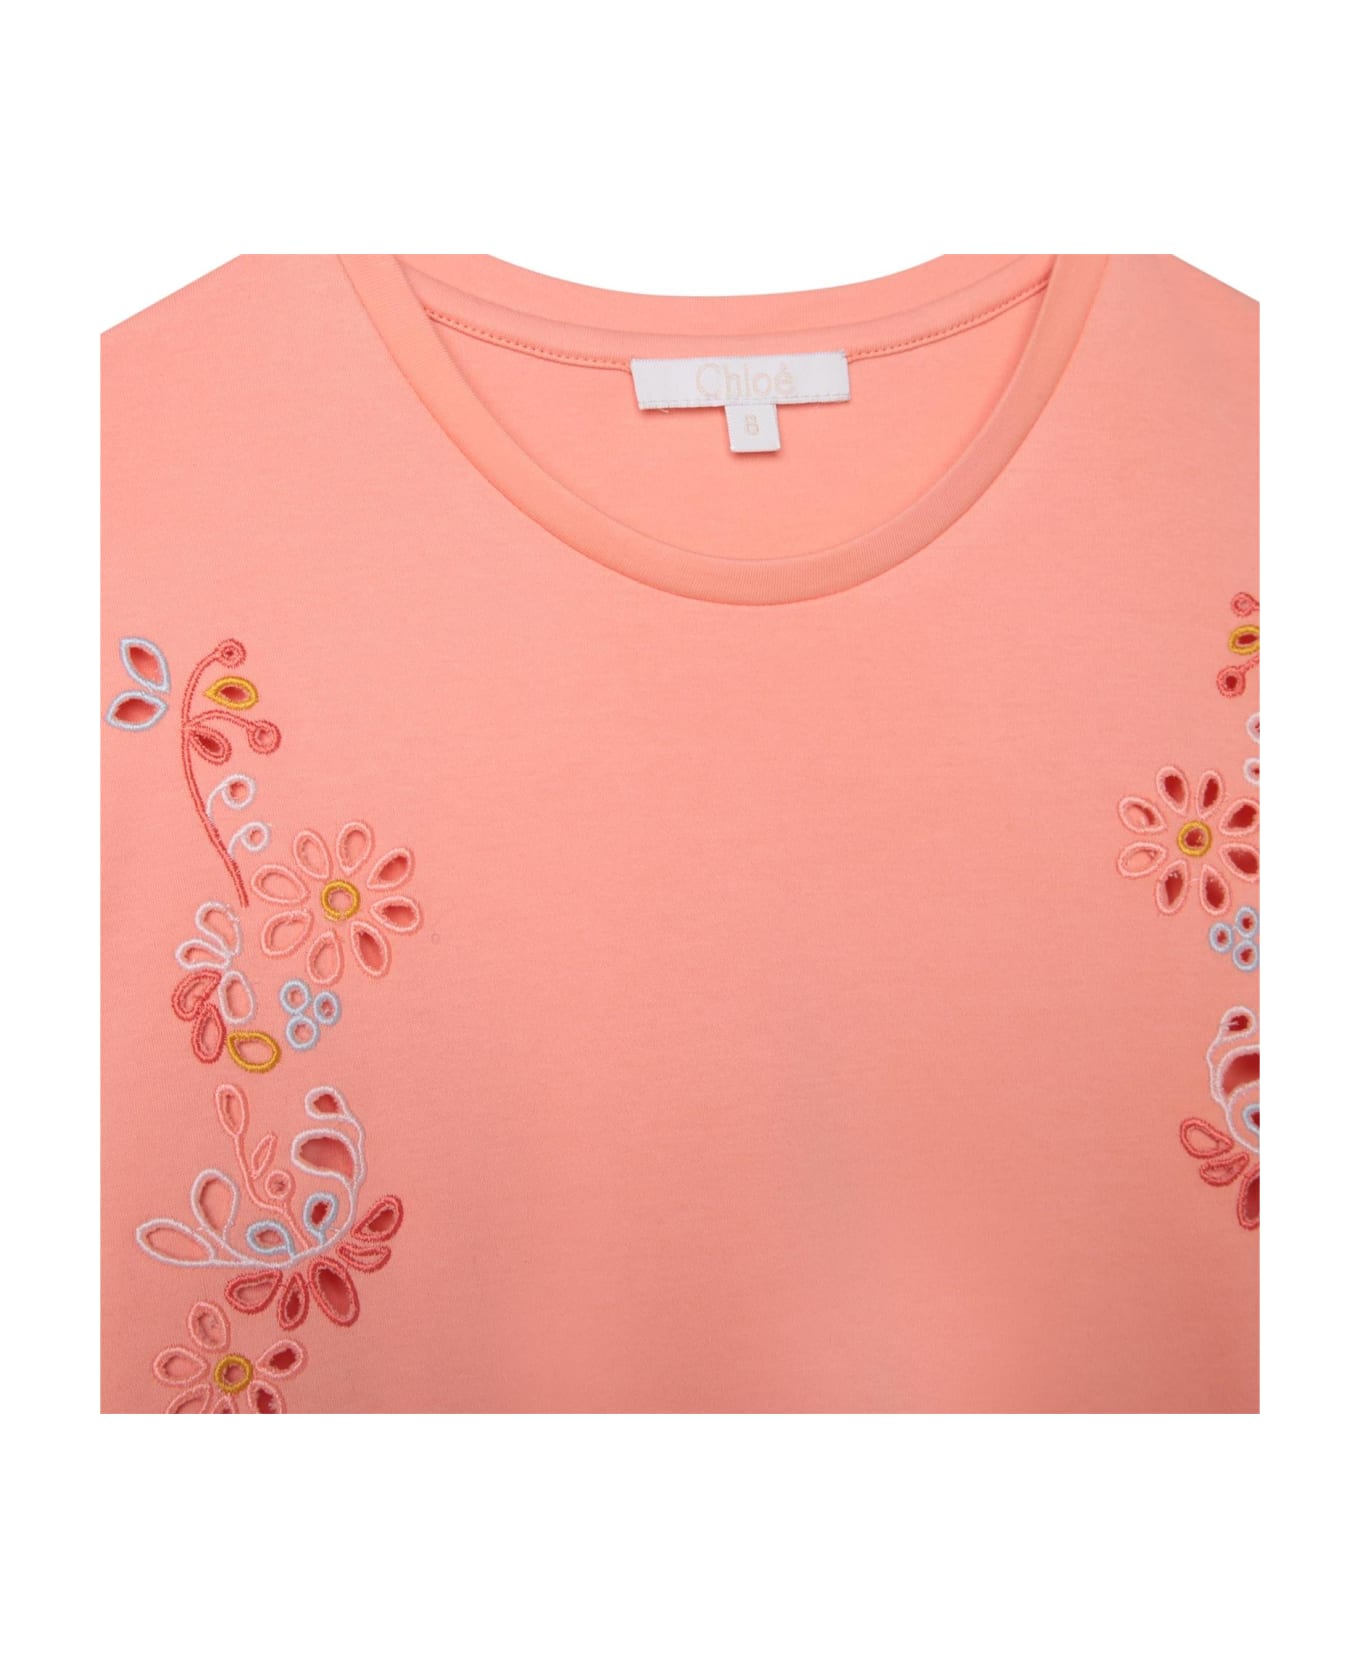 Chloé Broderie Anglaise Lace T-shirt - C Albicocca